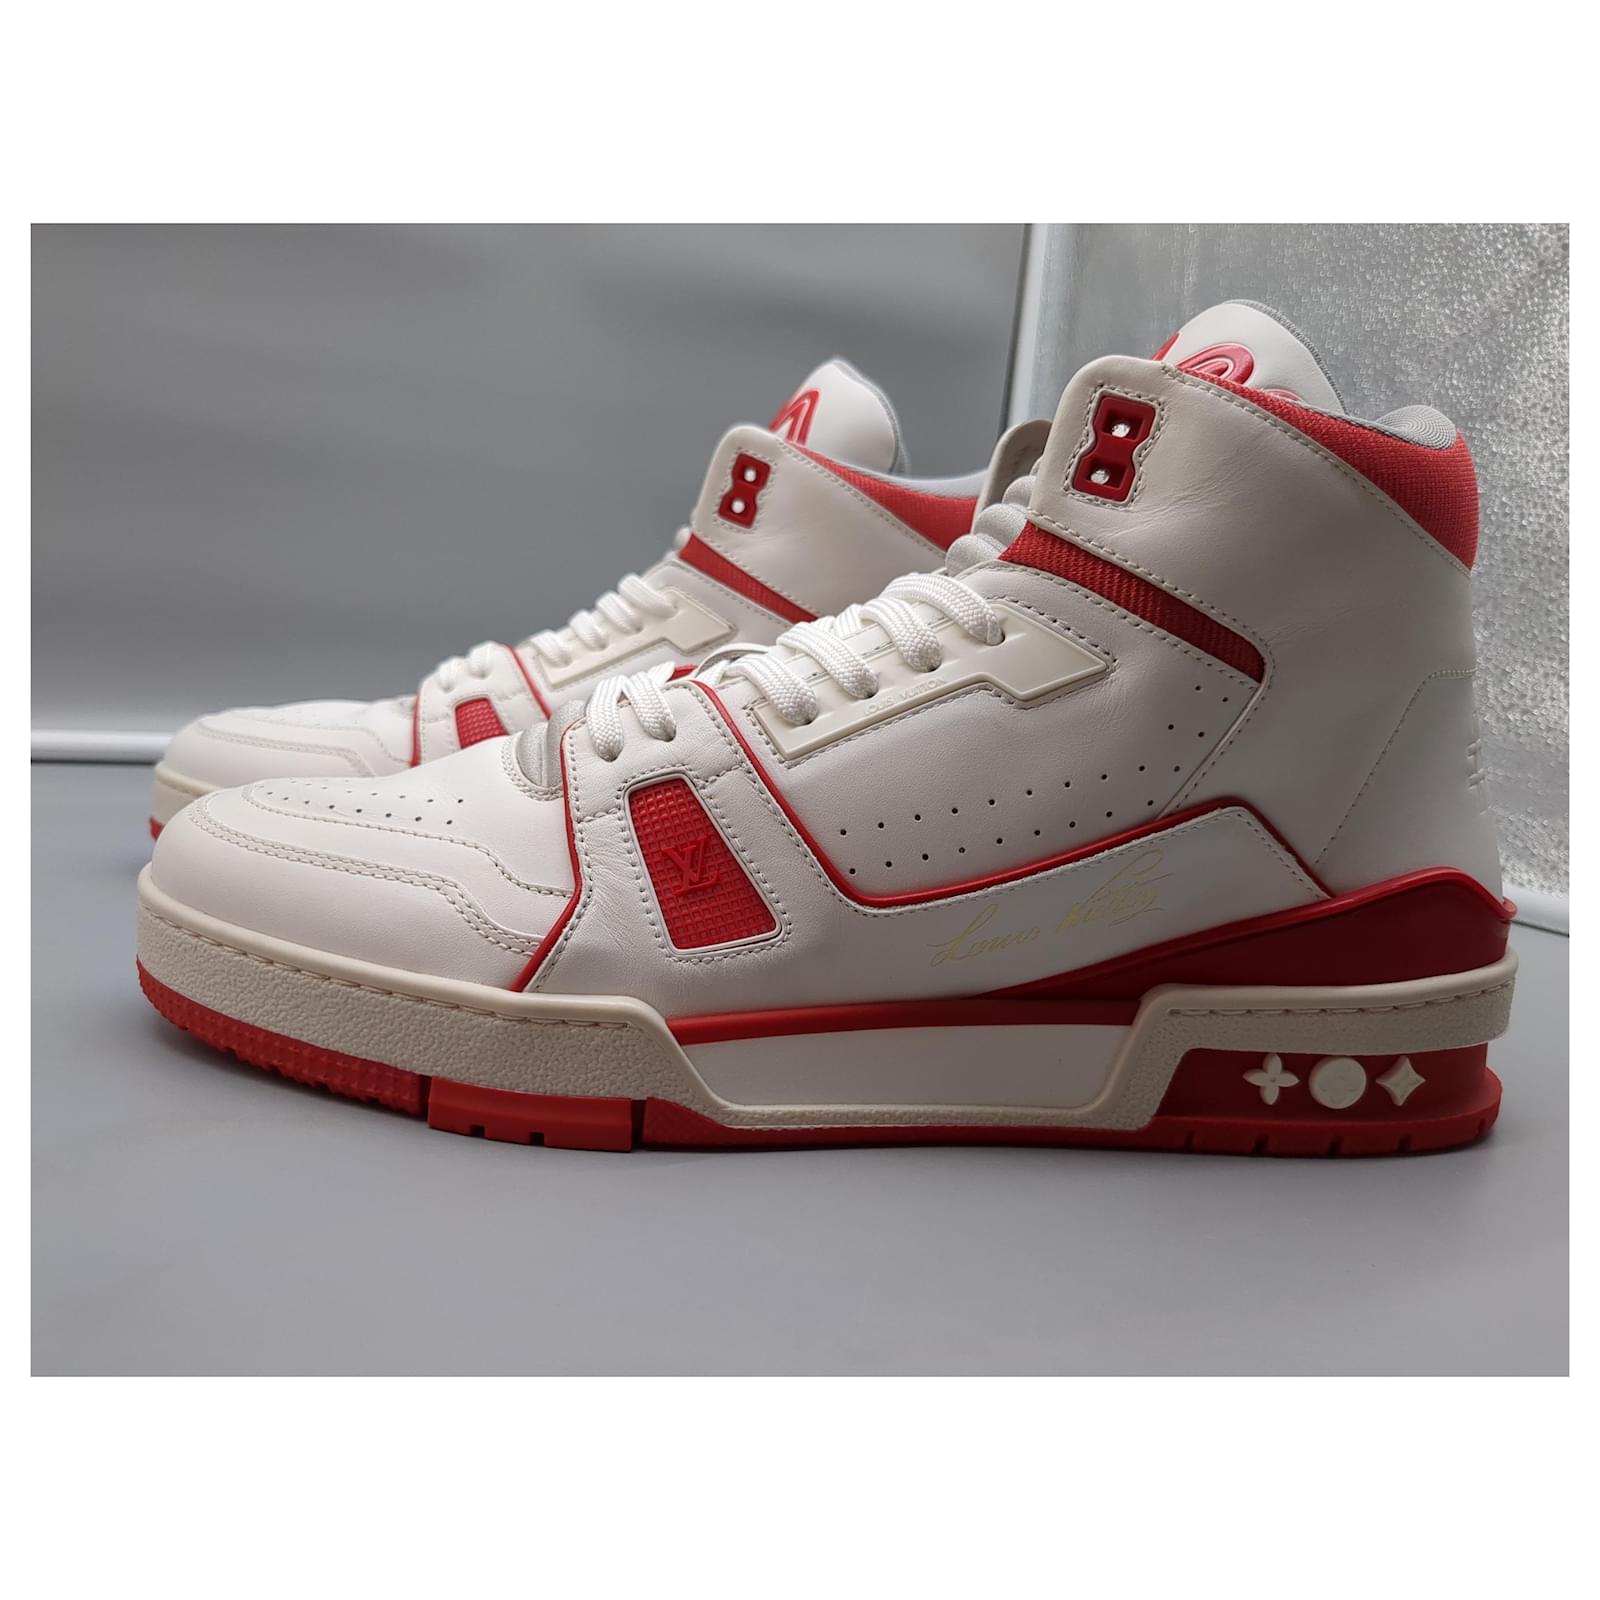 Louis Vuitton LV TRAINER SNEAKER MID-TOP Virgil Abloh White Red